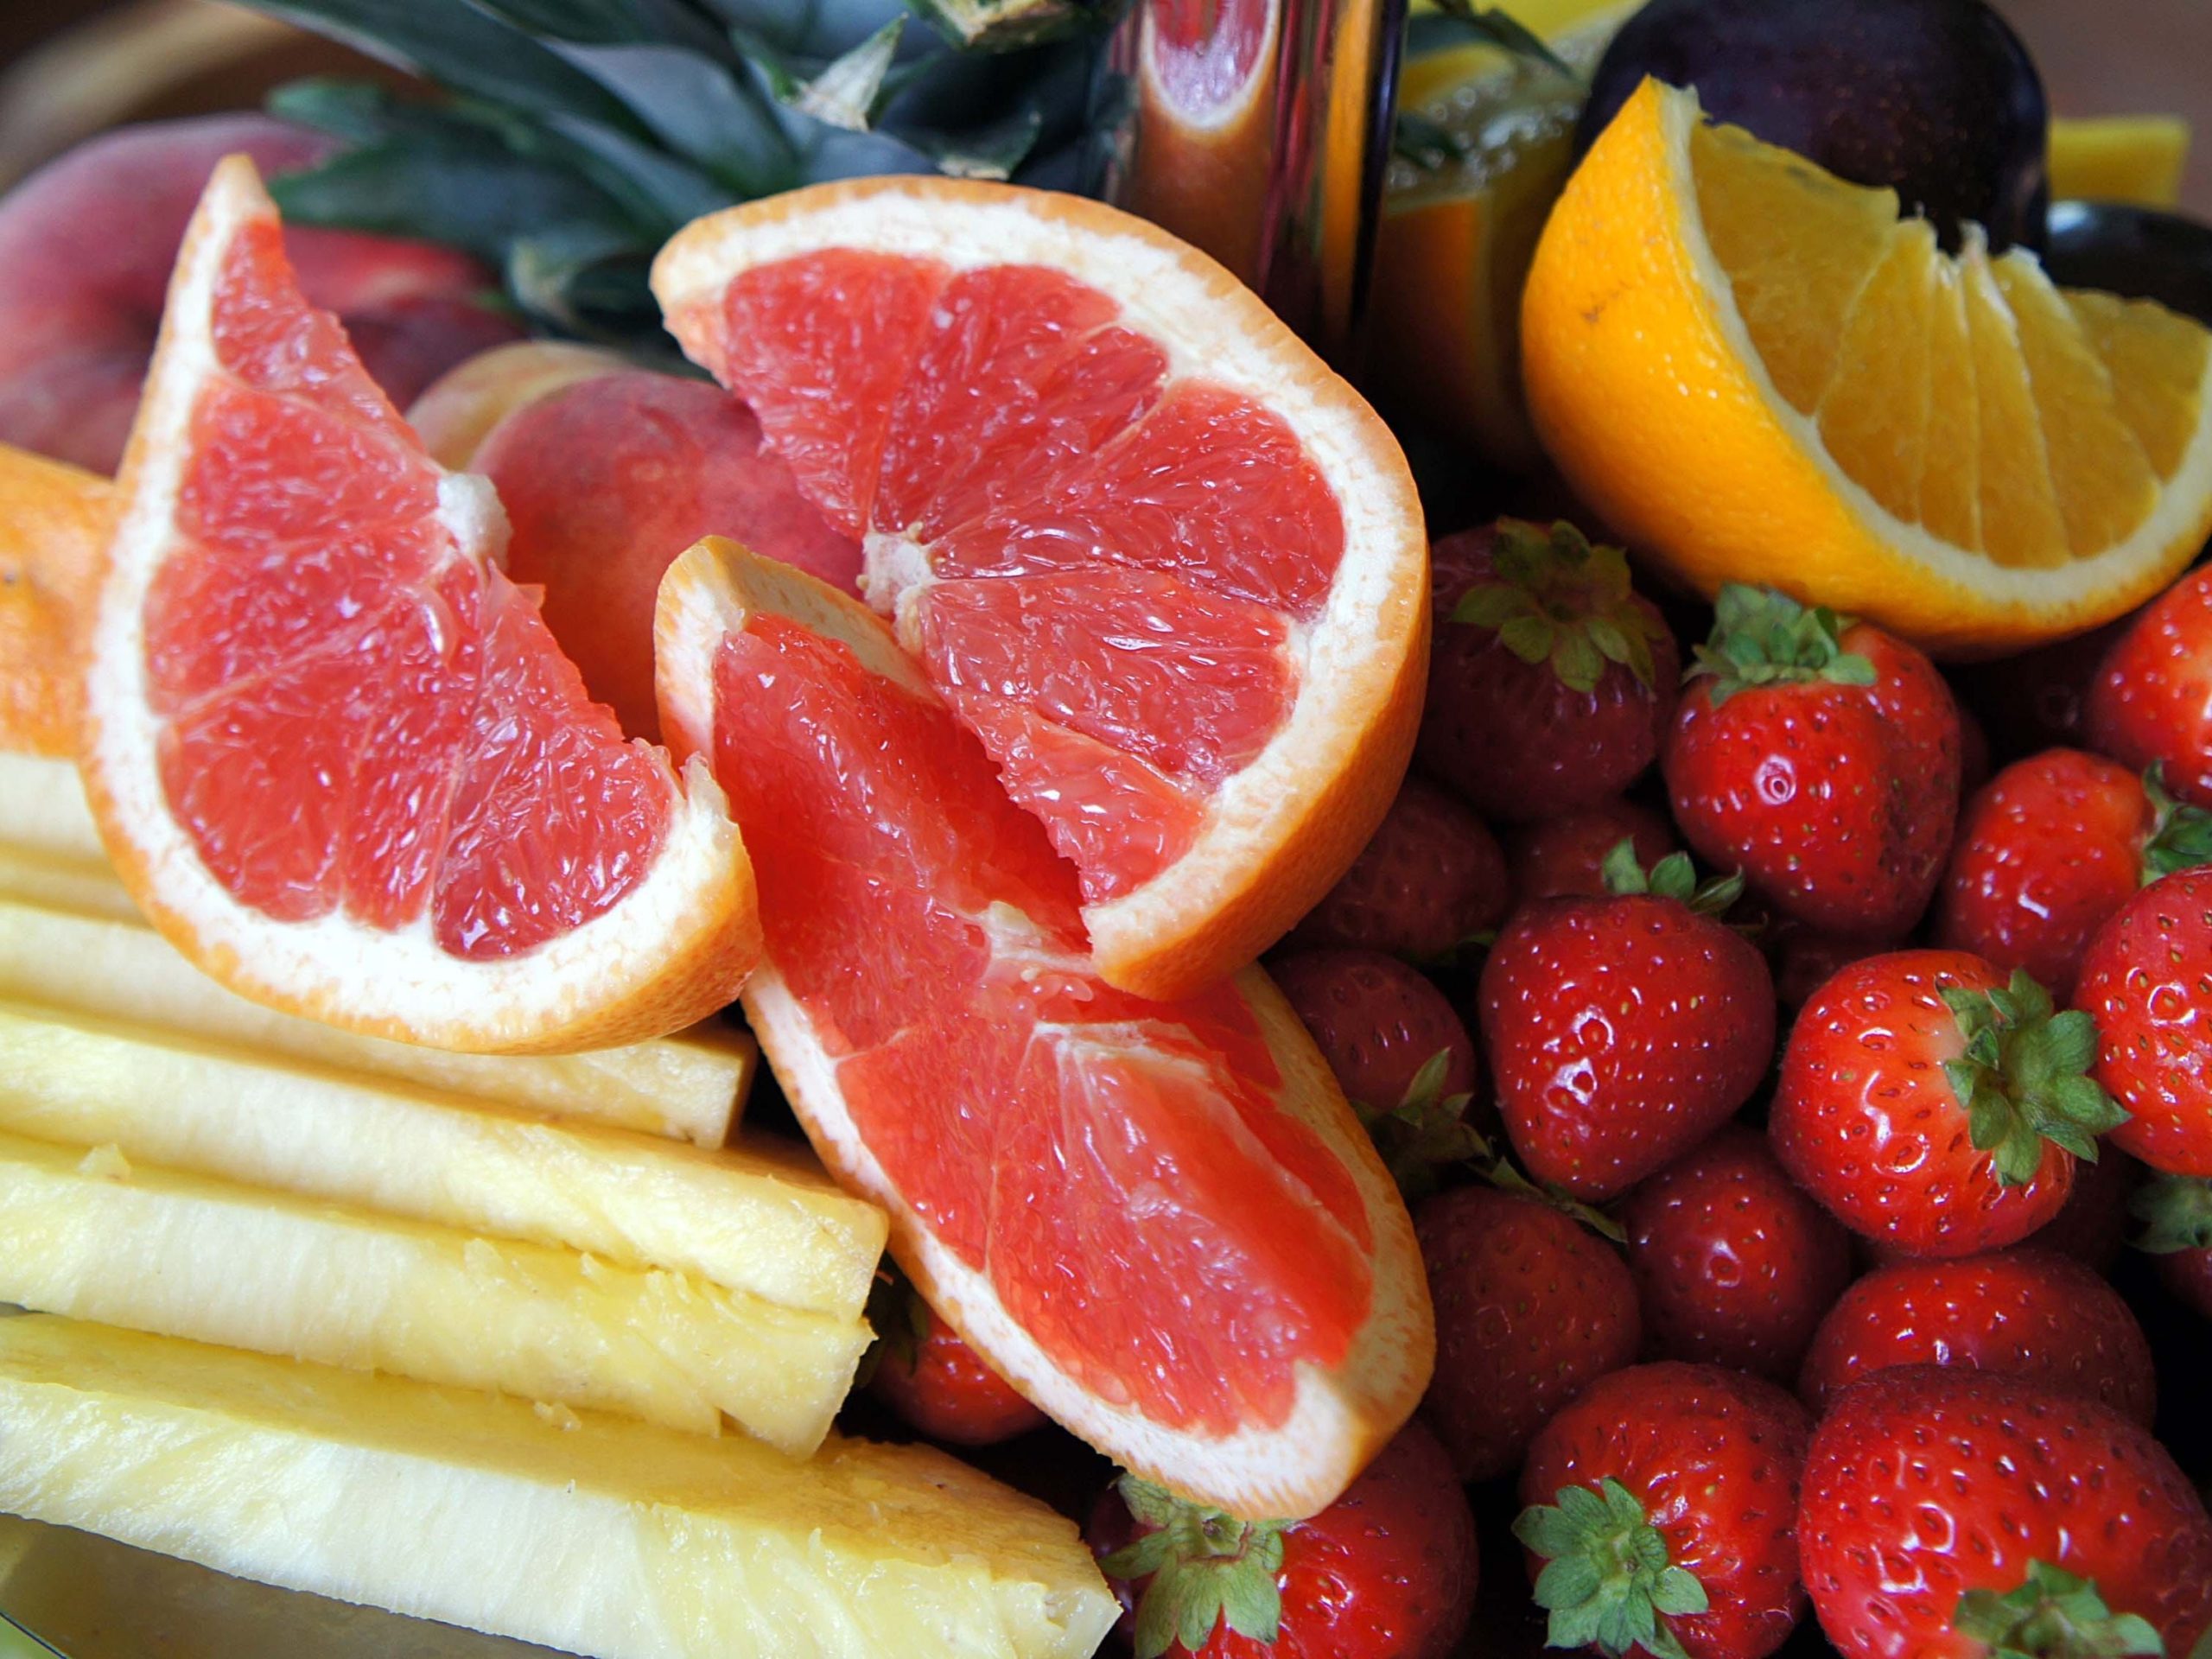 You can enjoy a bowl of fresh fruit as a breakfast side dish.